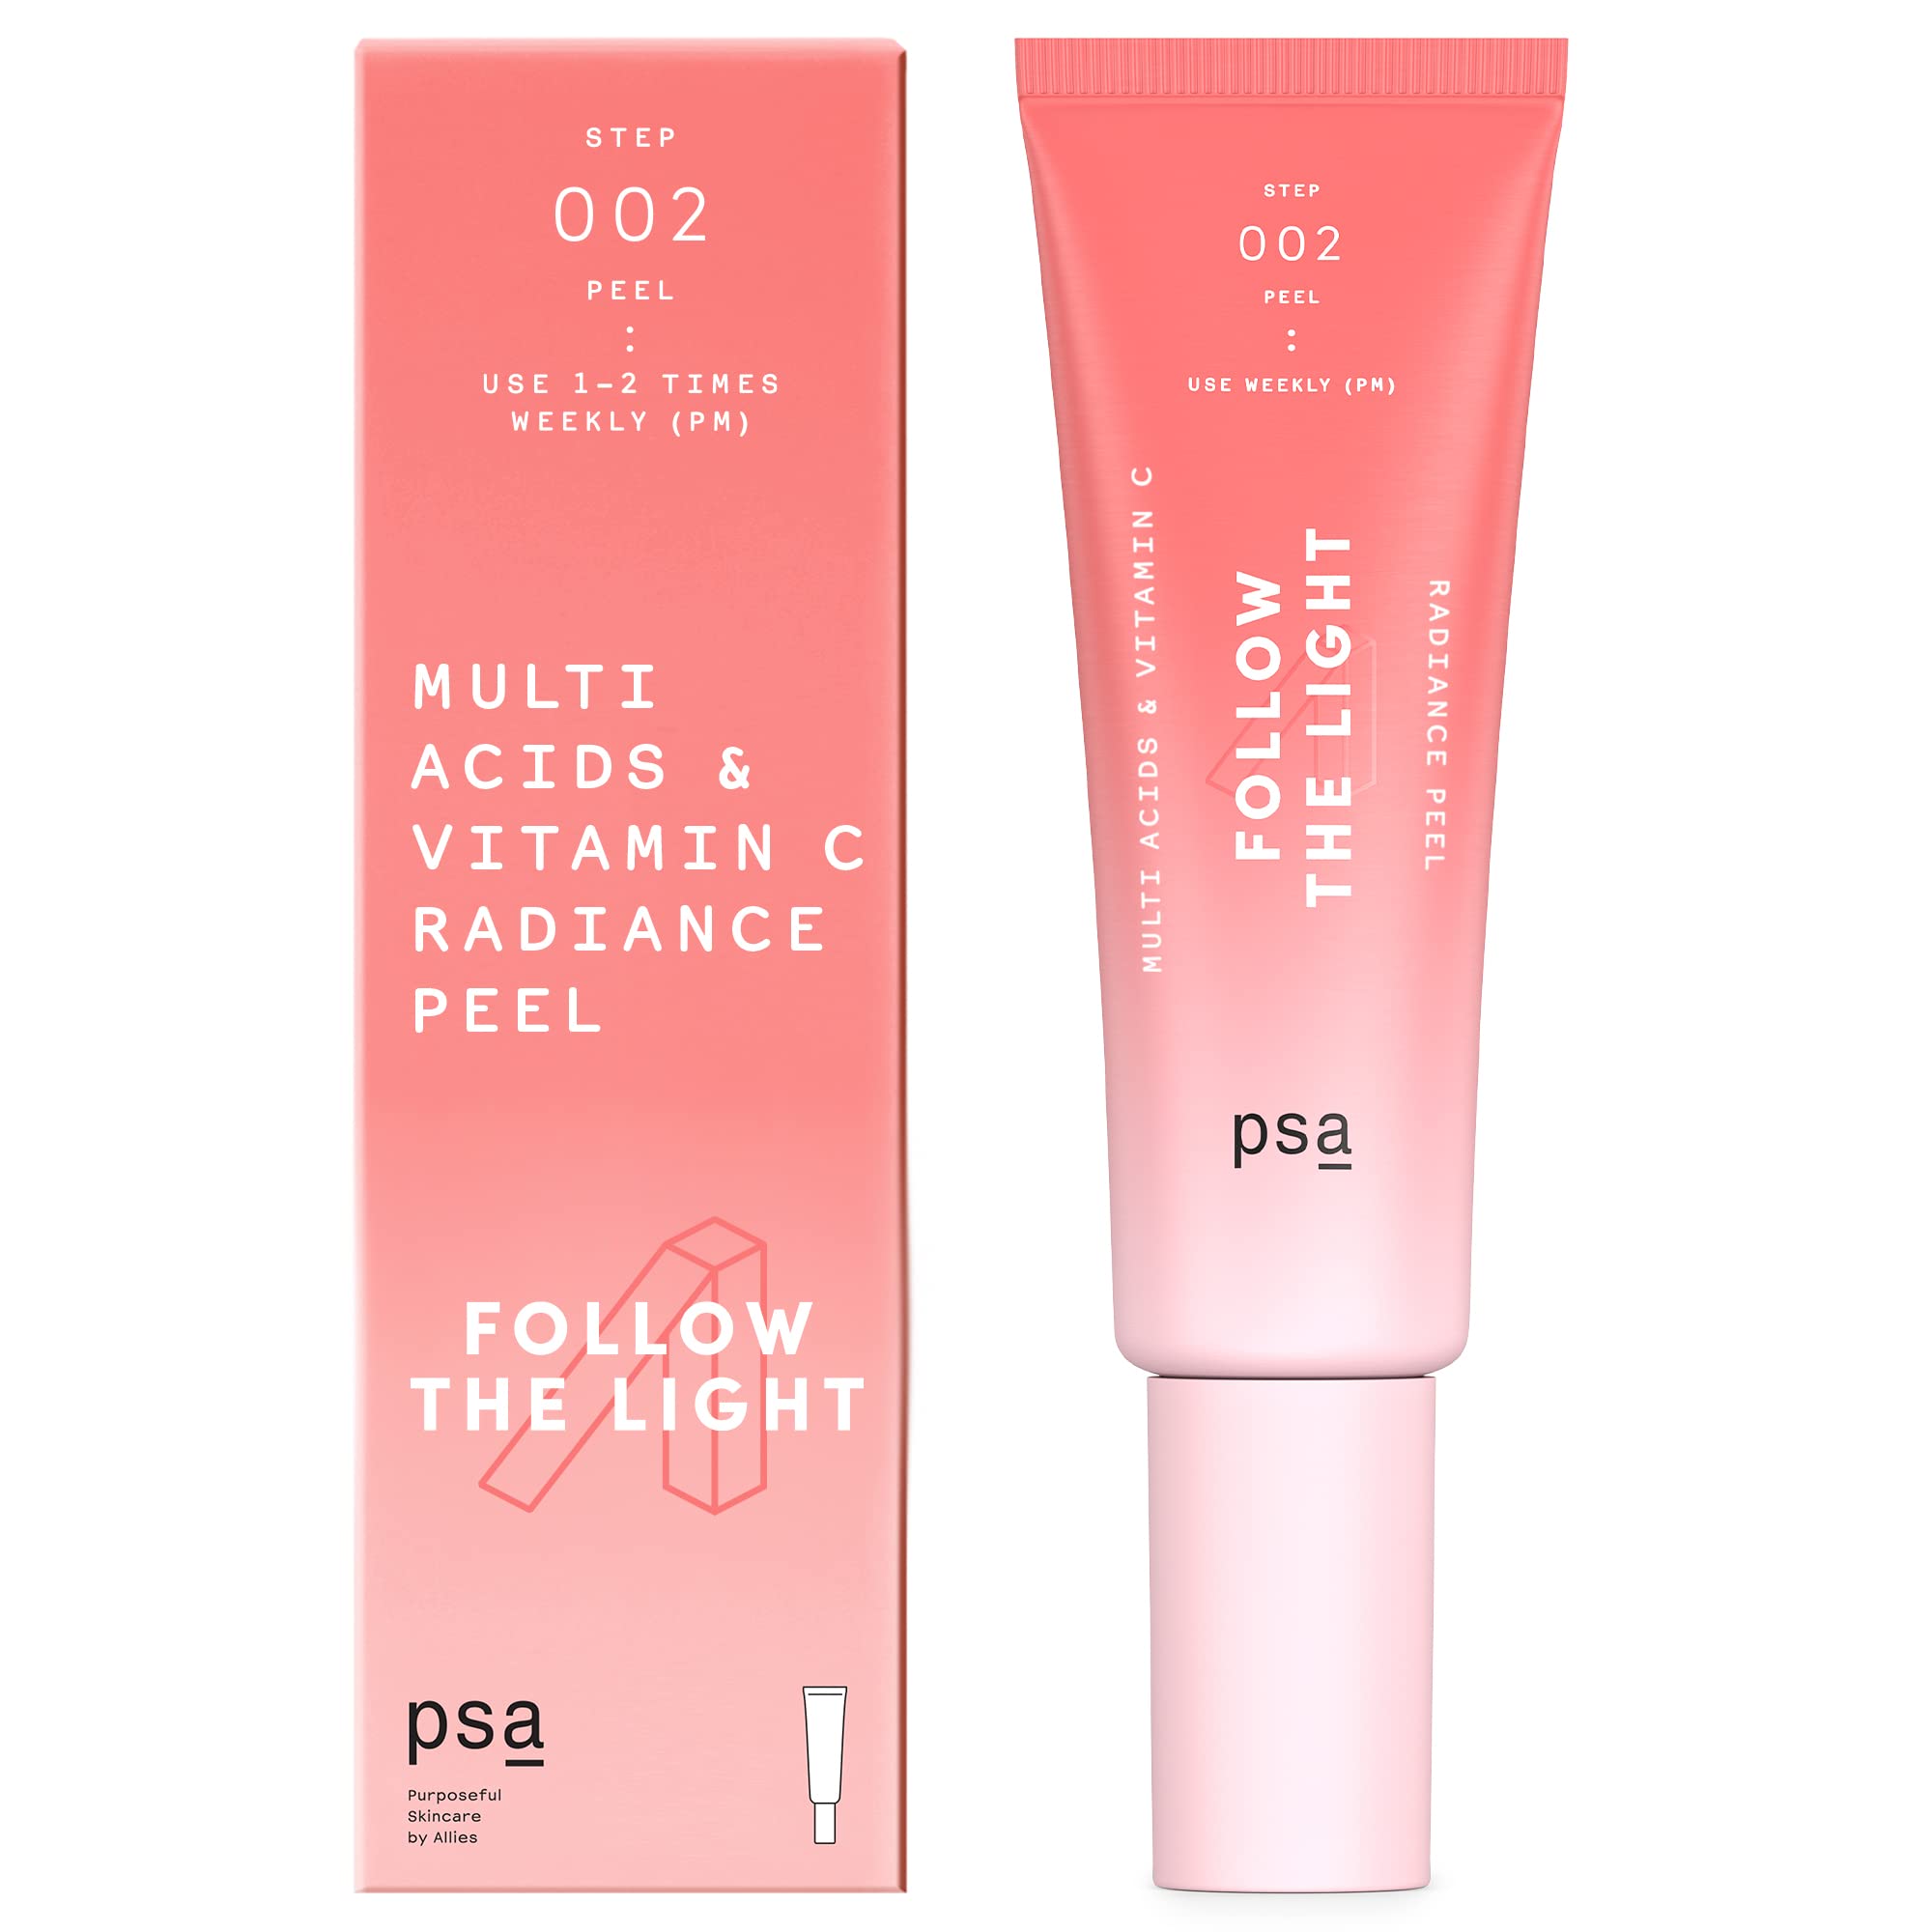 PSA FOLLOW THE LIGHT Multi-Acids & Vitamin C Radiance Peel: Weekly Rinse-Off Facial Peel with 10% Glycolic & Lactic Acid, 5% Vitamin C + Pomegranate Enzymes, Centella Asiatica, 50 ml/ 1.7oz